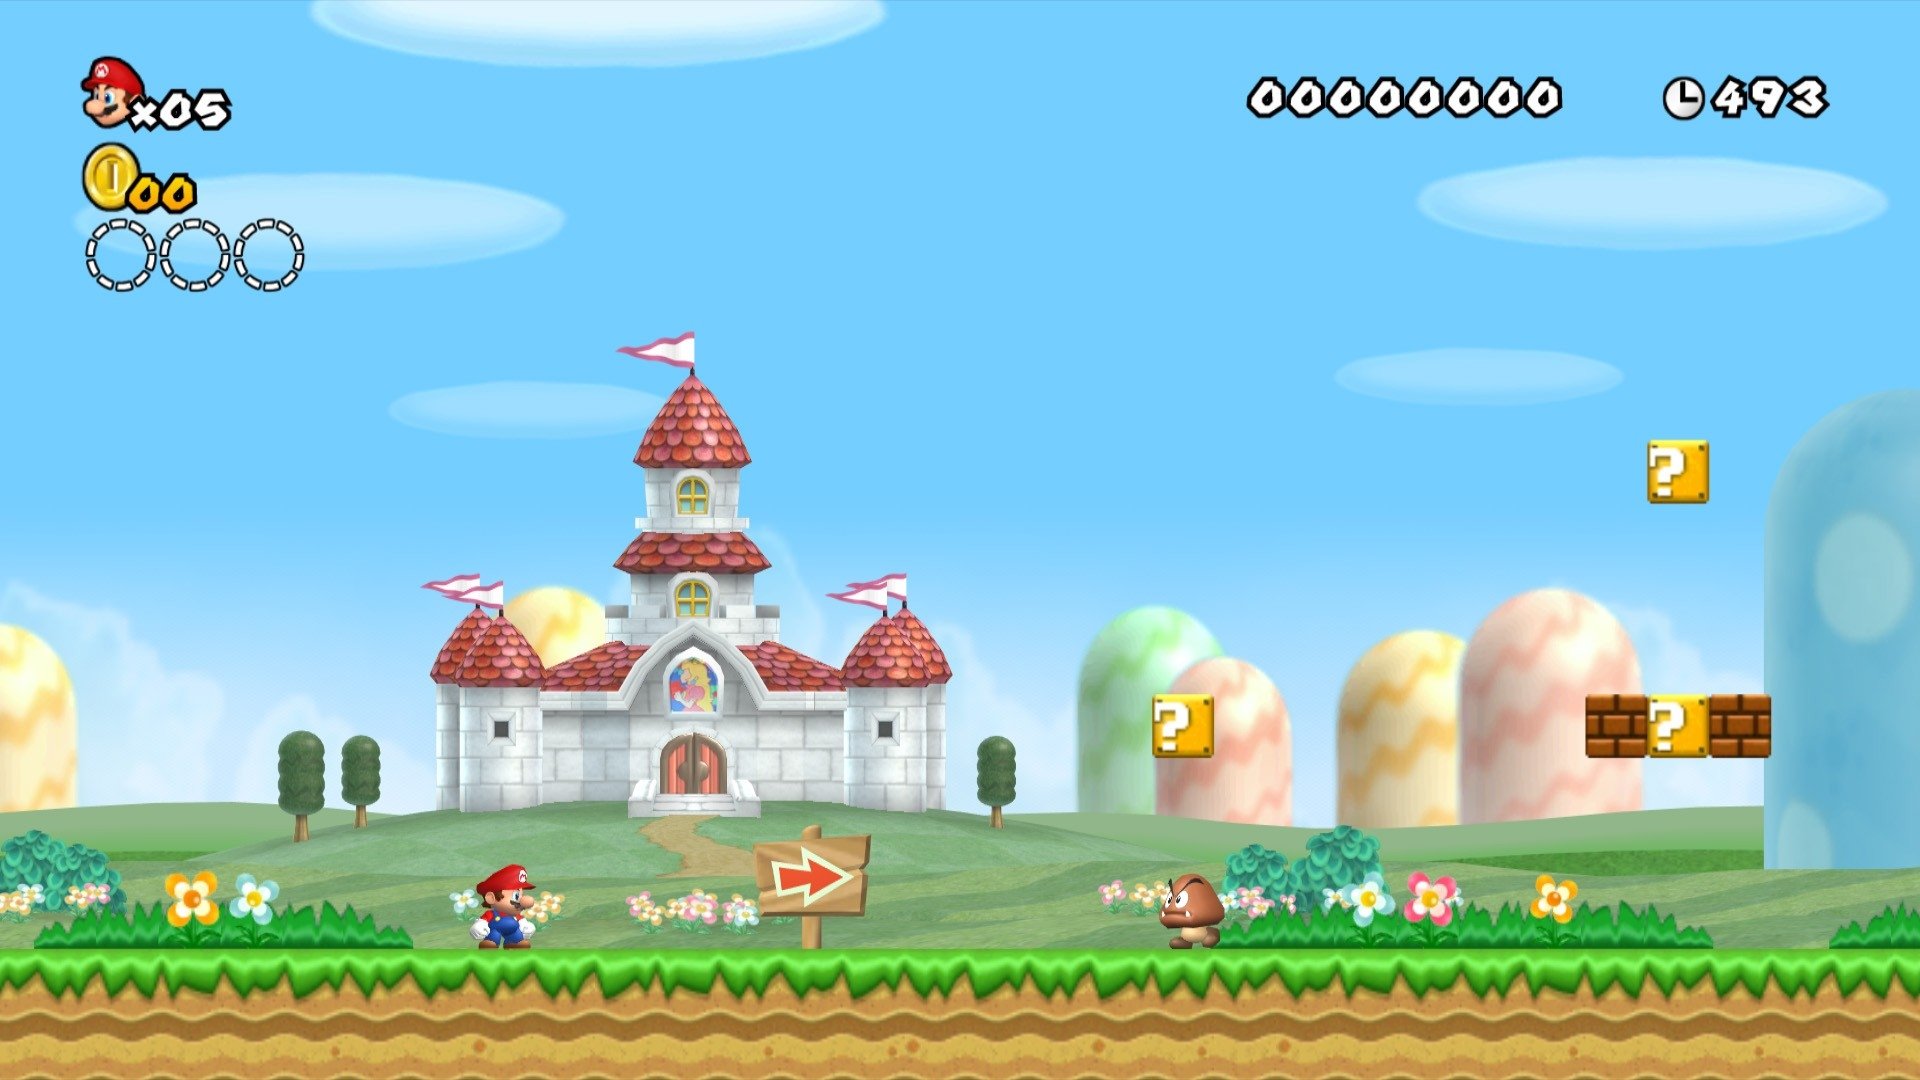 New Super Mario Bros. Wii HD Wallpaper and Background Image